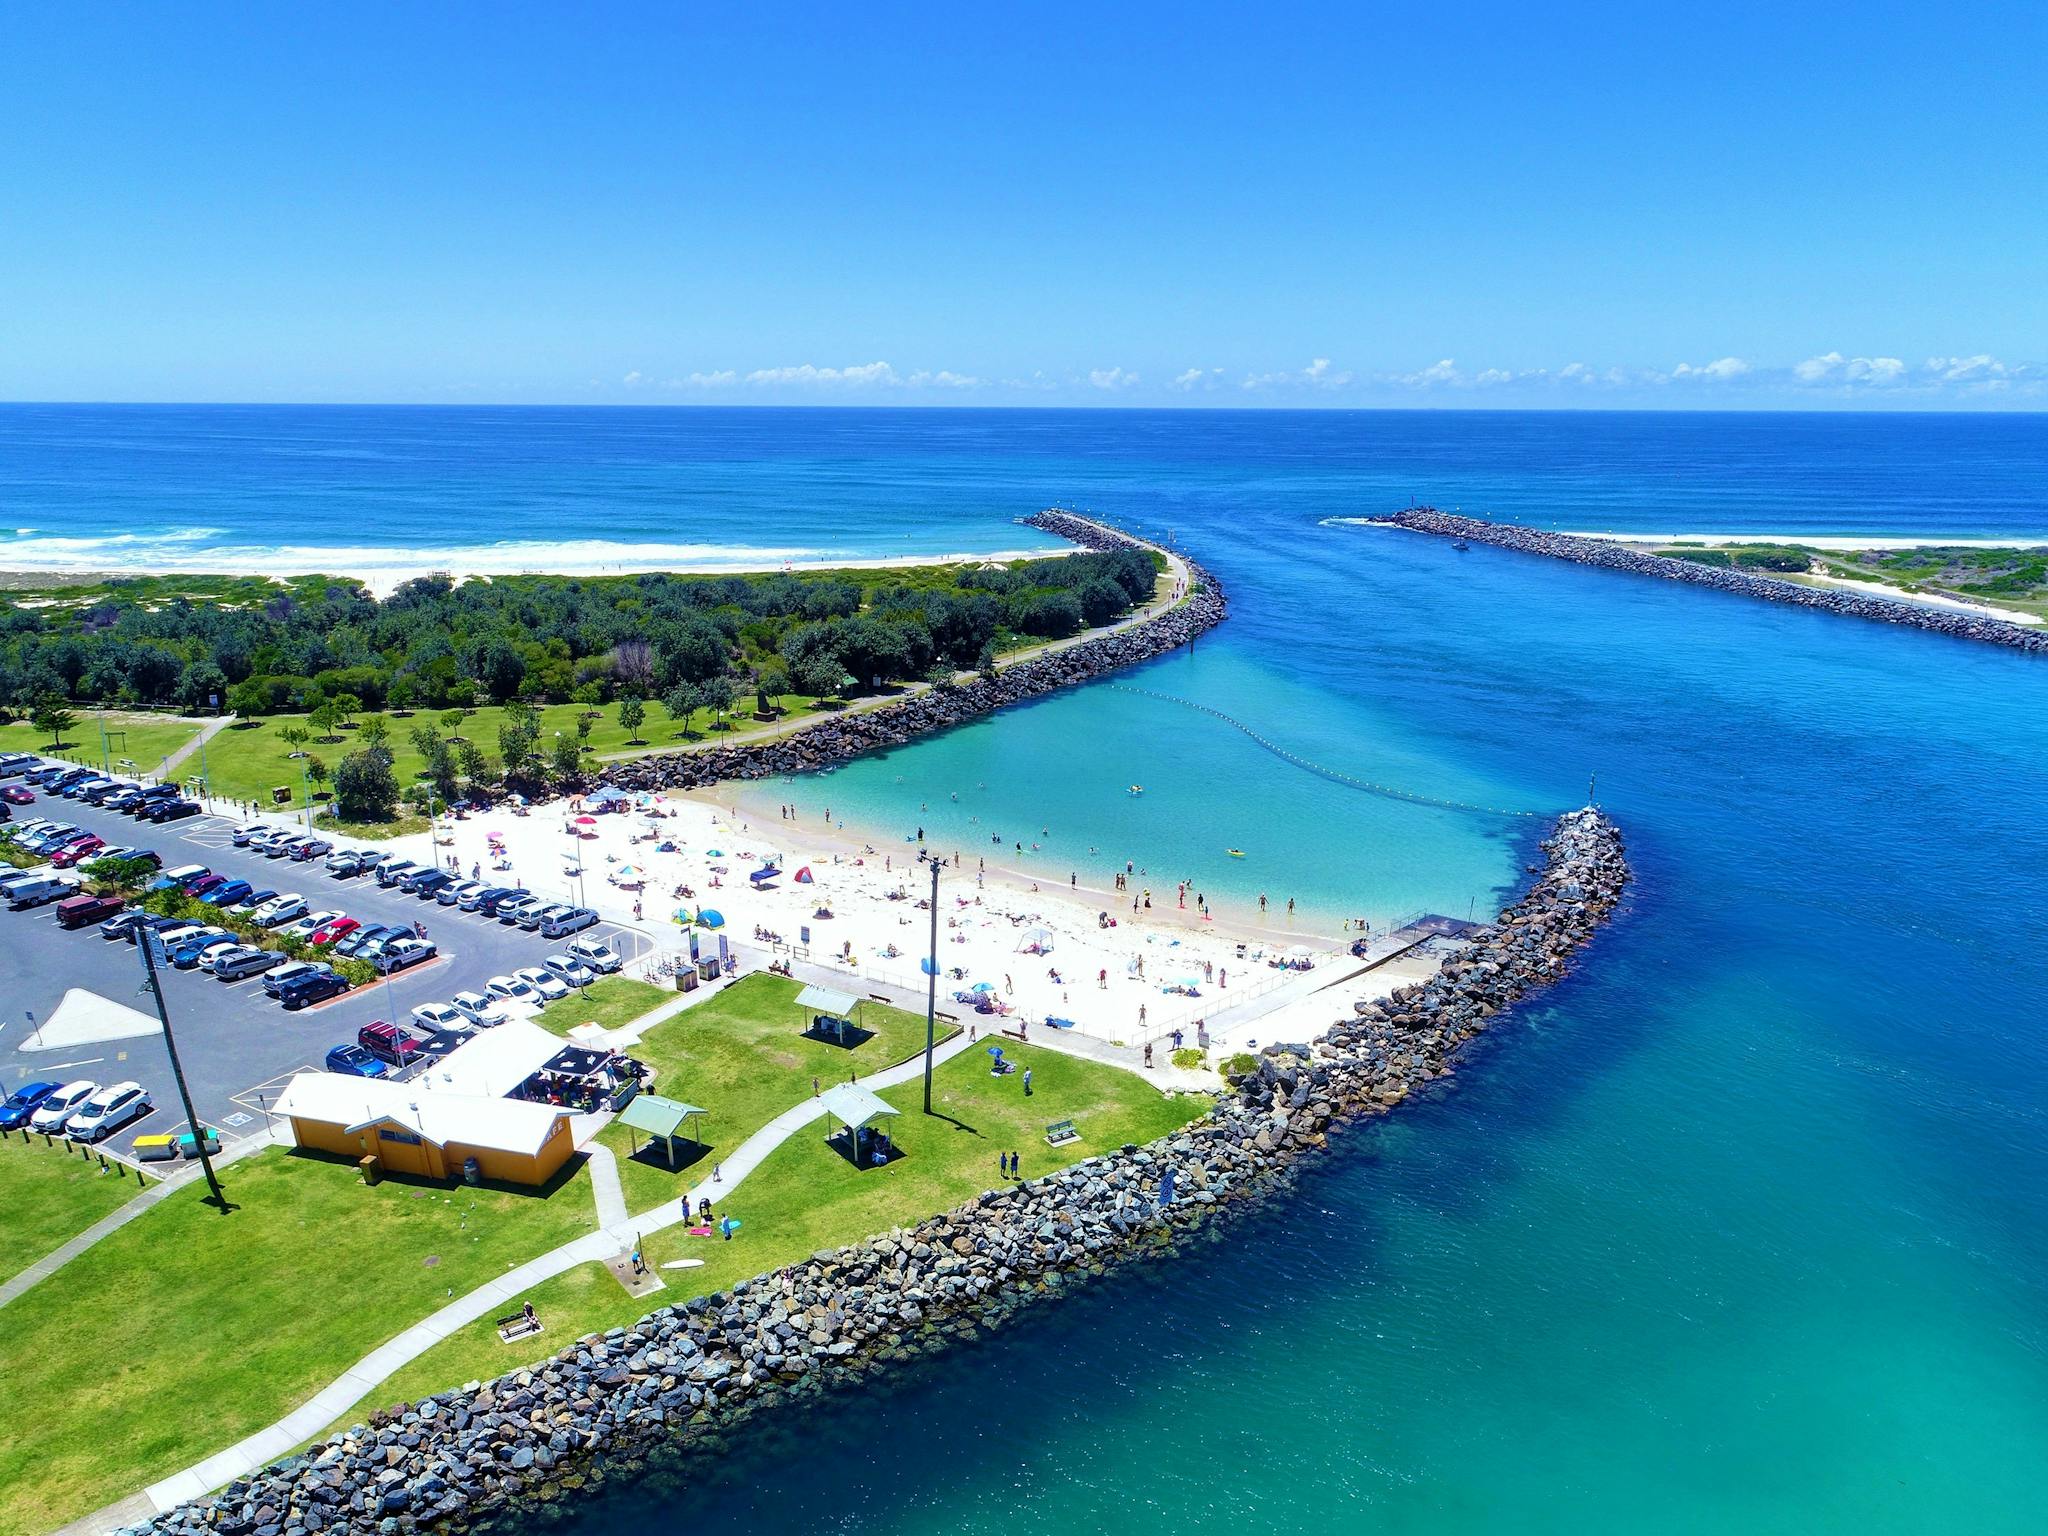 Tuncurry Rock Pool - Forster | VisitNSW.com